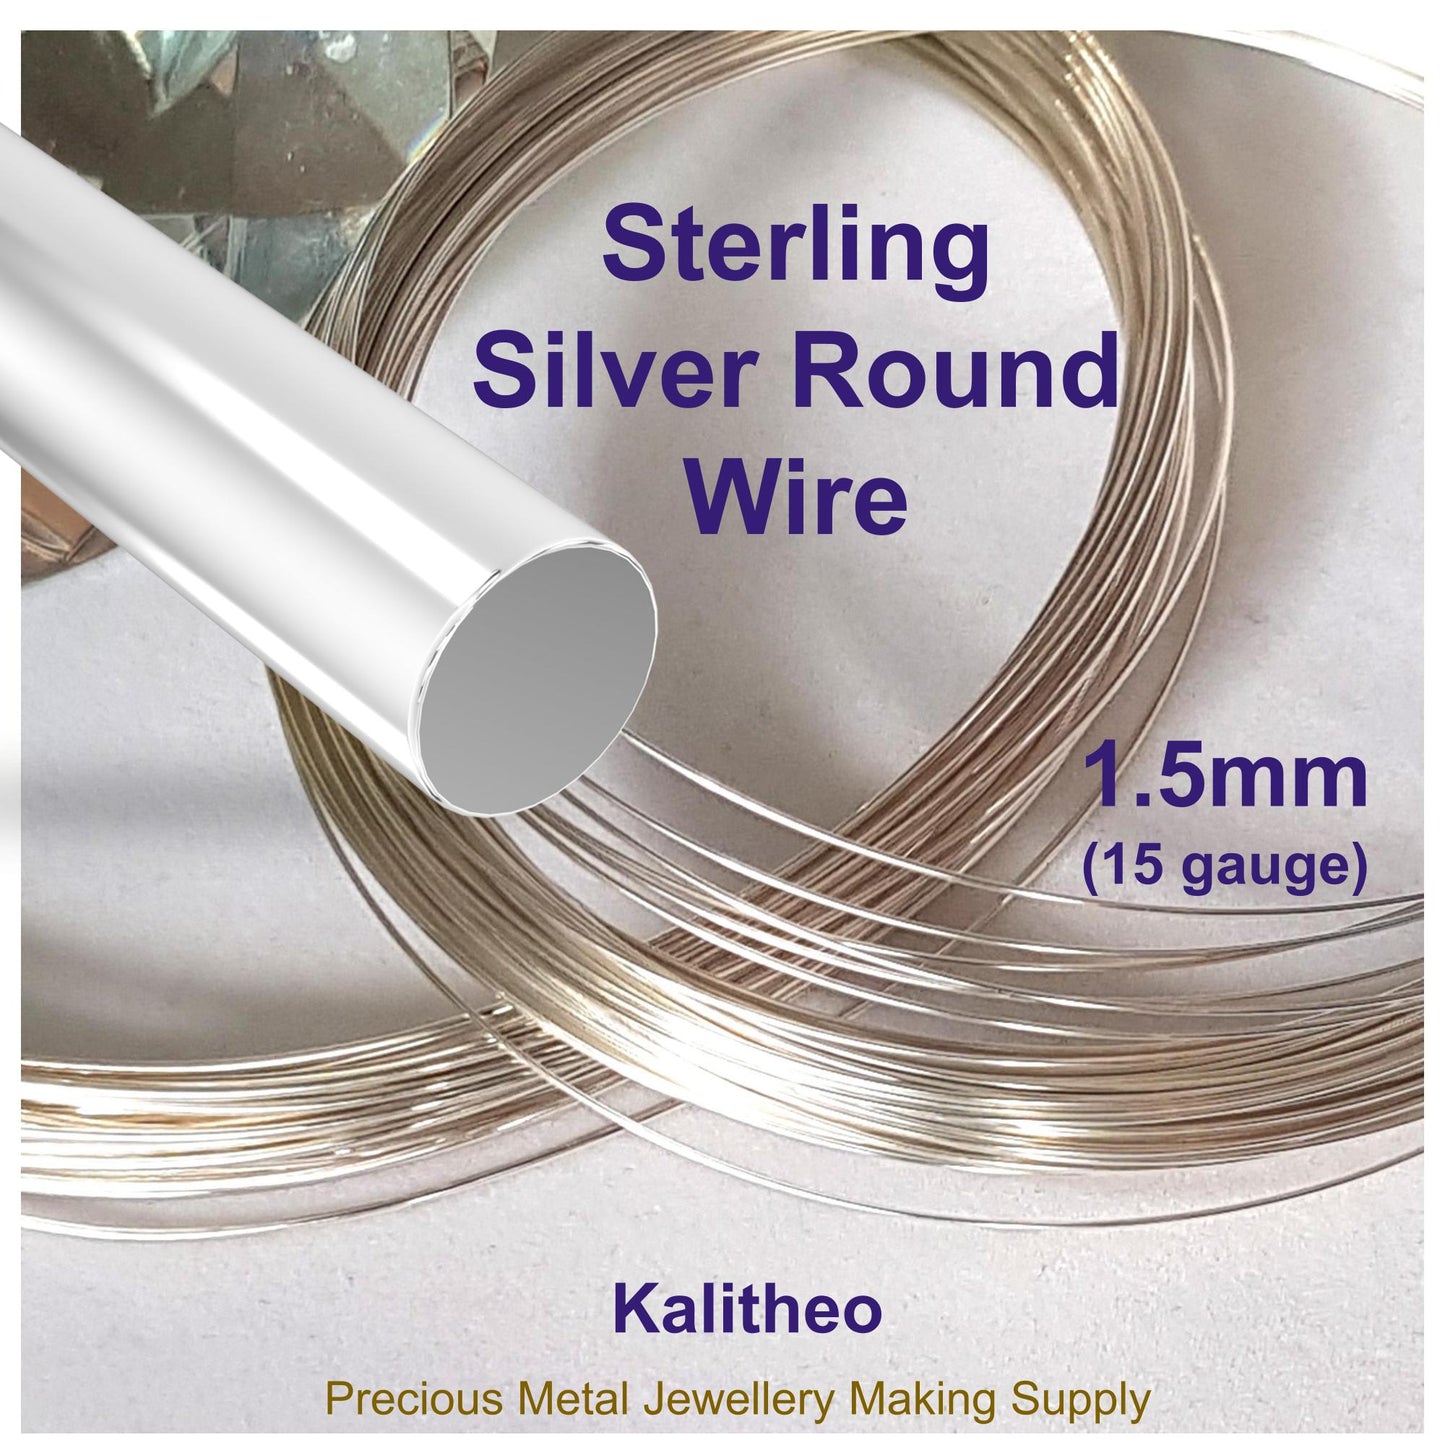 FAB Metals - 1.5mm Round Sterling Silver Wire ( 15 gauge) | Jewellery Making Supply